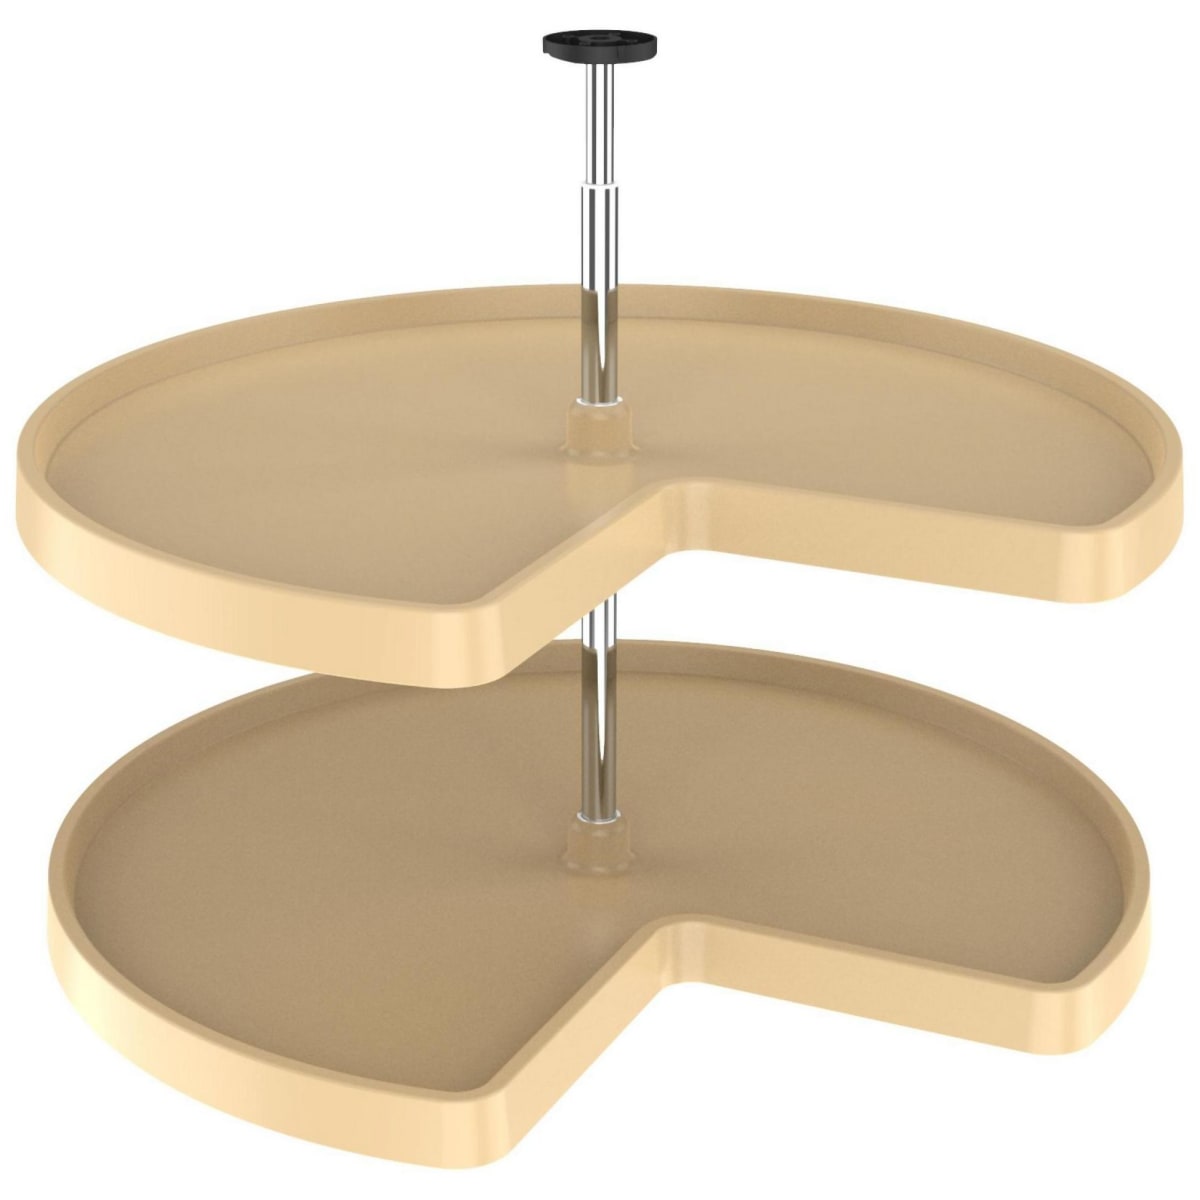 Kidney Shaped Plastic Lazy Susan - 24 in - Handles & More